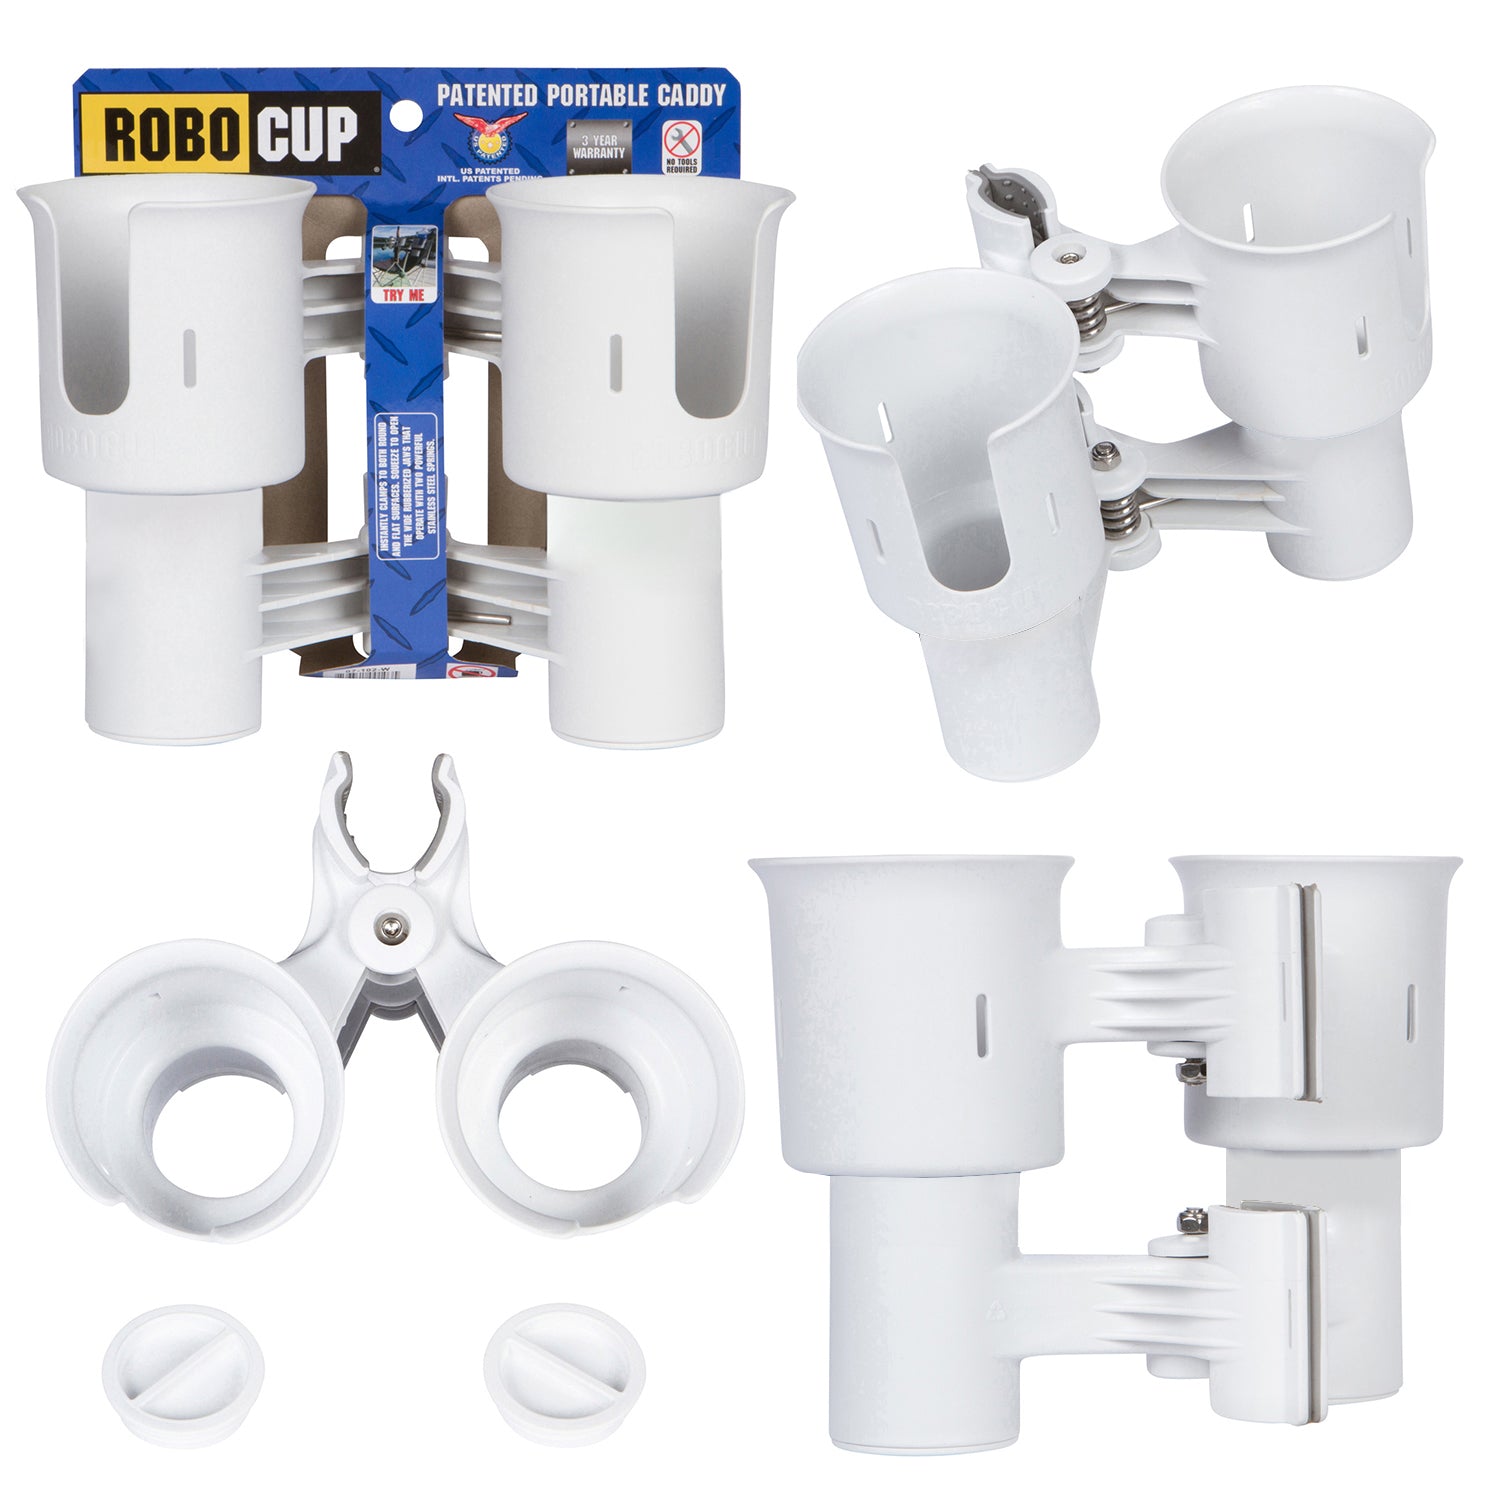 RoboCup BLACK Patented Clamp on Caddy Dual Cup, Drink & Rod Holder